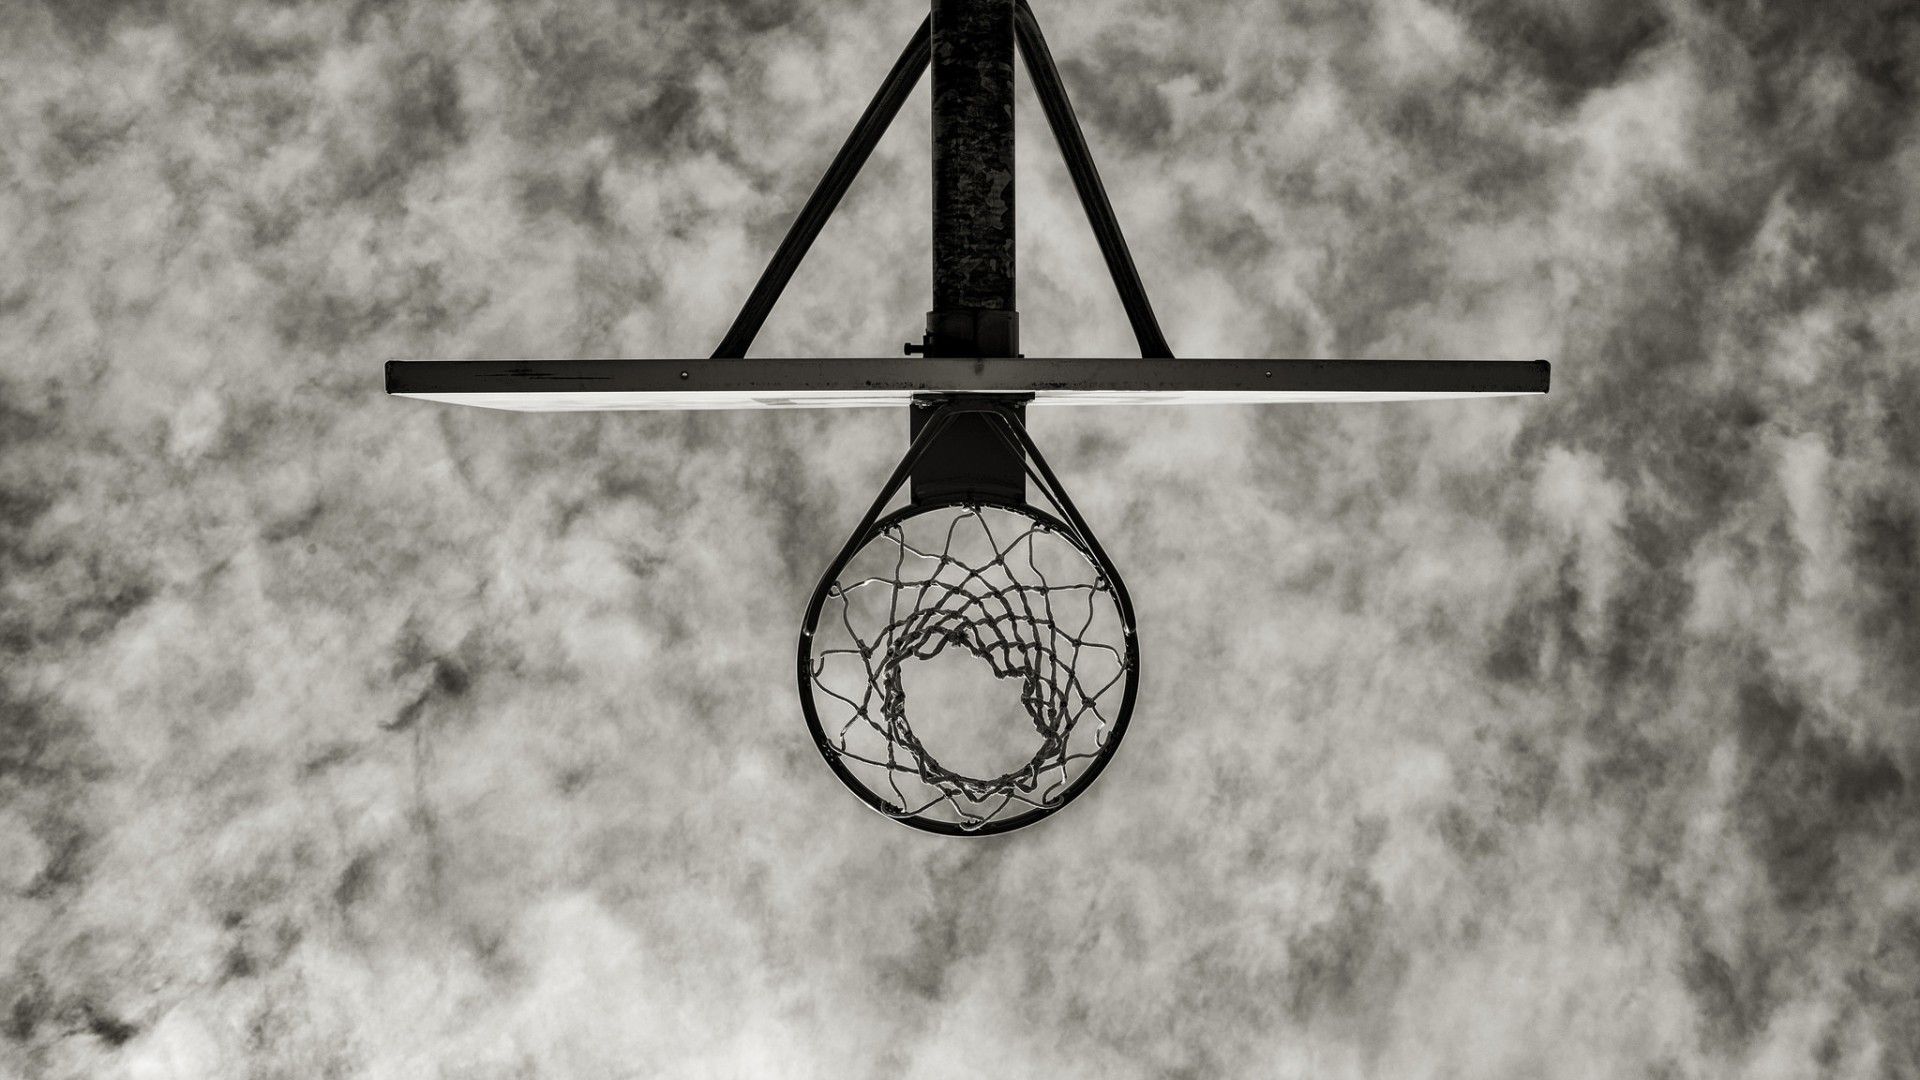 Basketball - Desktop wallpapers, download free wallpapers and ...